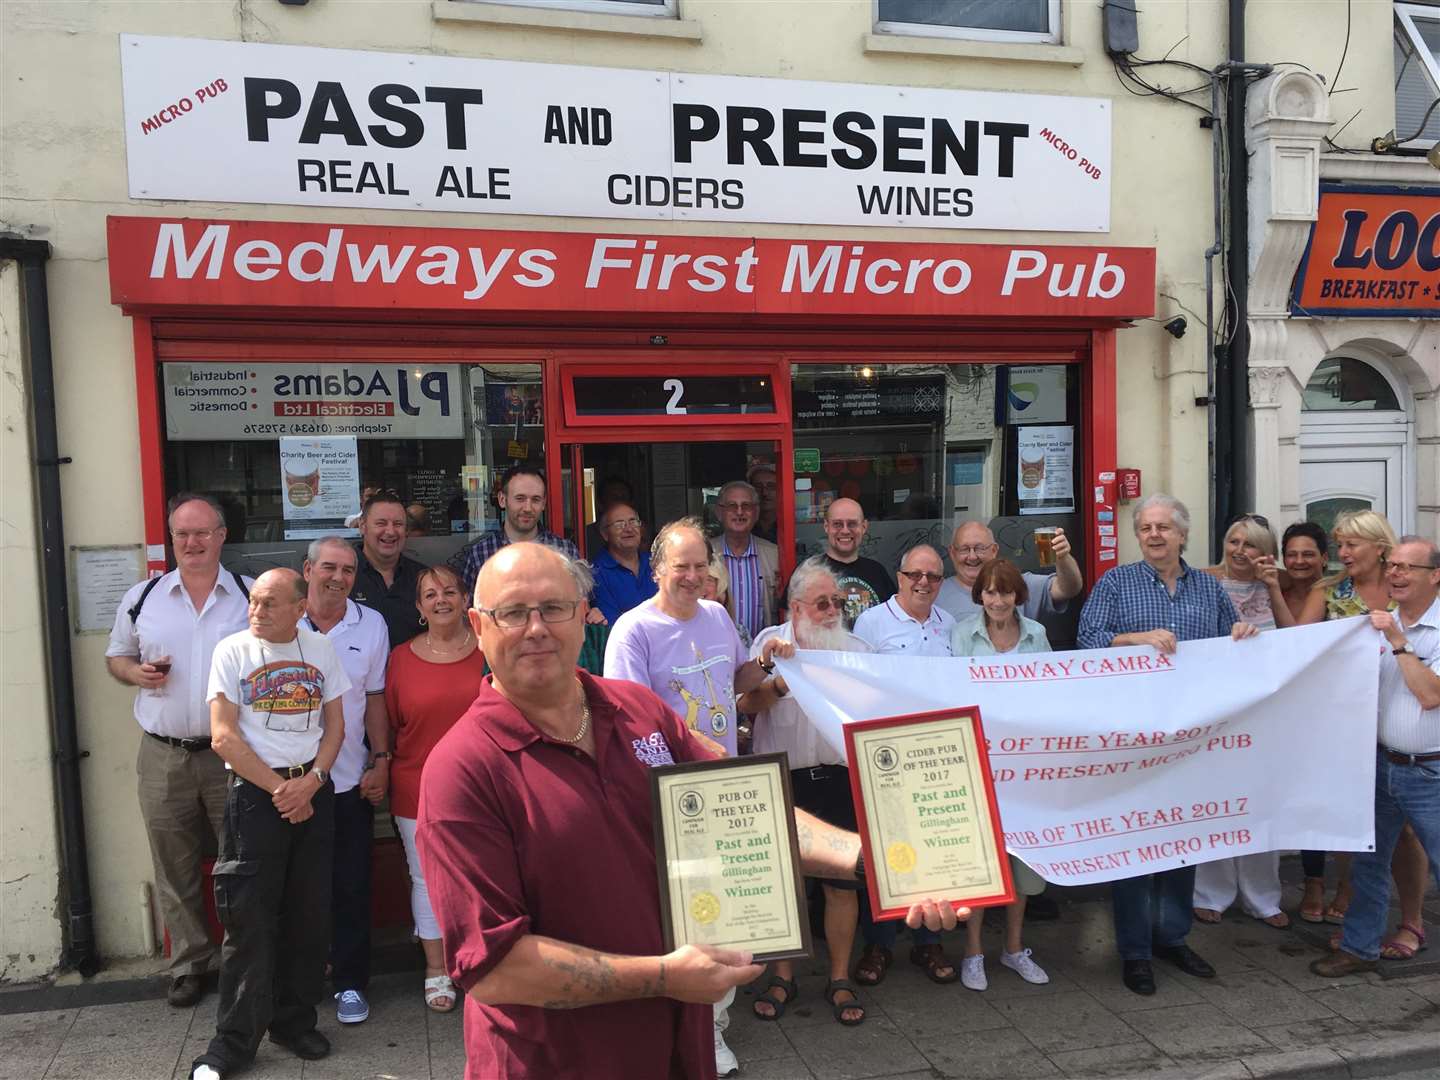 Past and Present micropub landlord Dave Hallowell shows off the awards from CAMRA for Medway's best pub and best cider pub